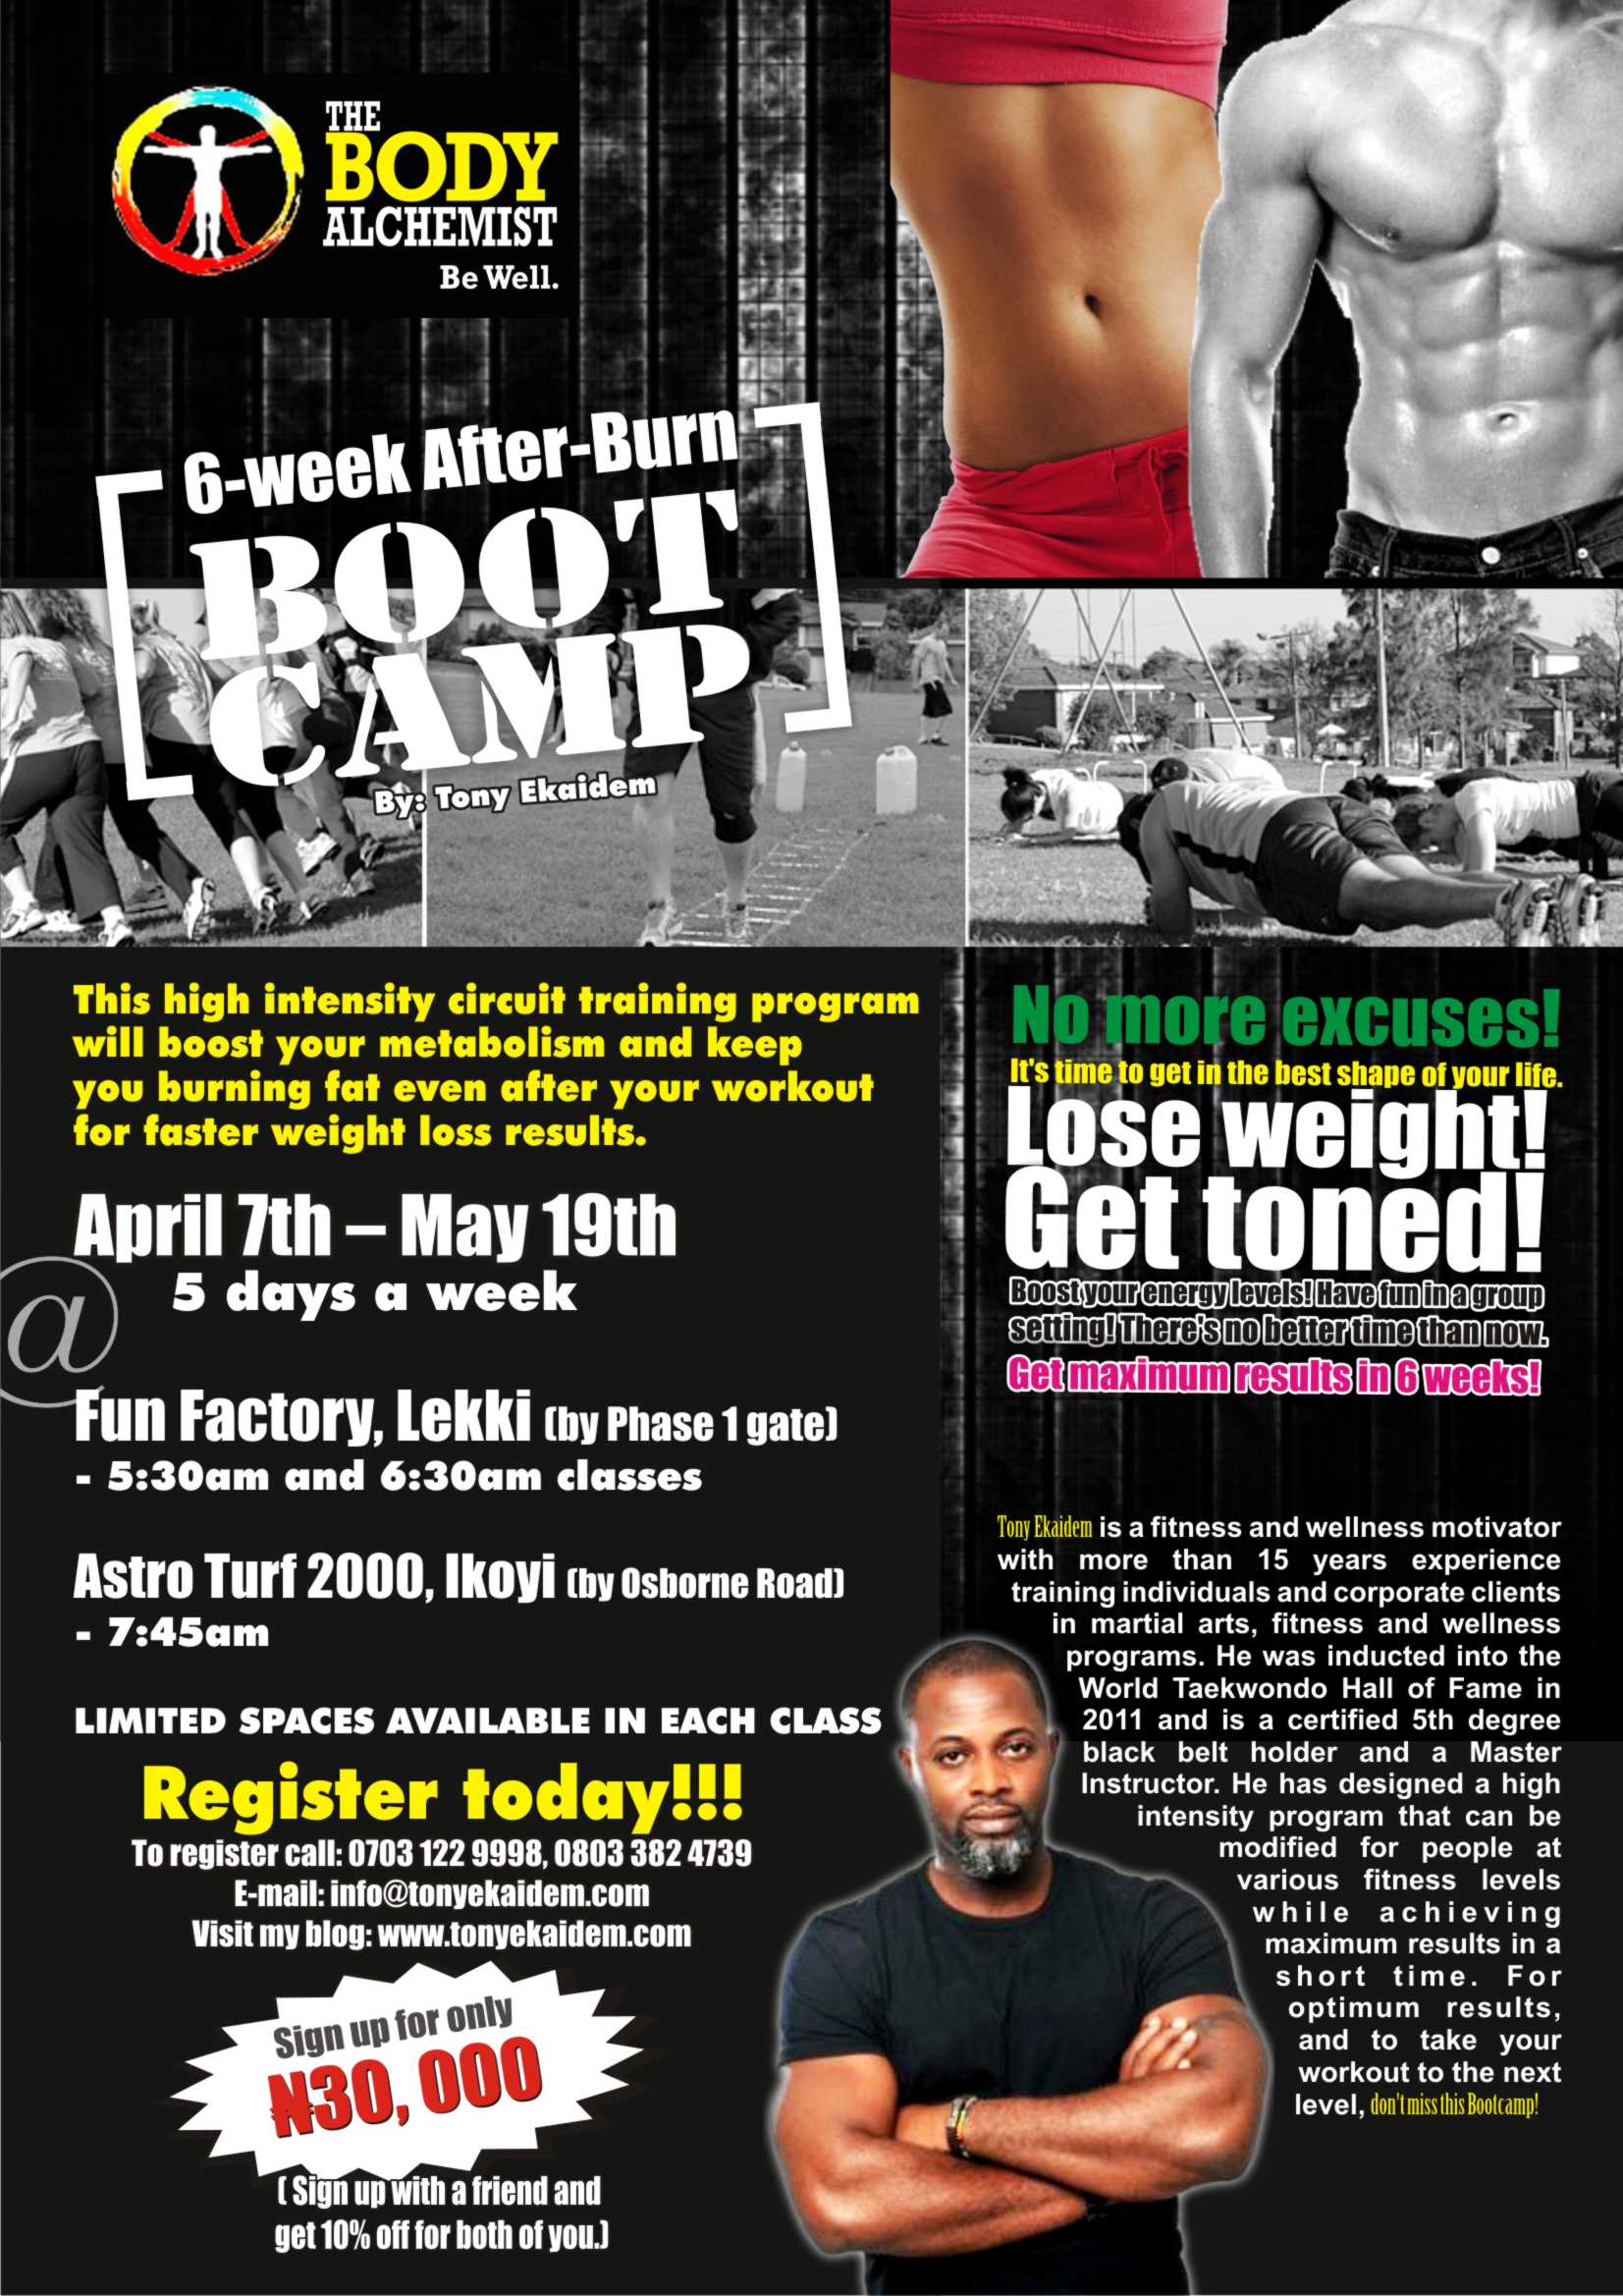 Stay In Shape & Get a Toned Body in 2012 with Tony Ekaidem at the Body  Alchemist 6 Week “After Burn” Boot Camp